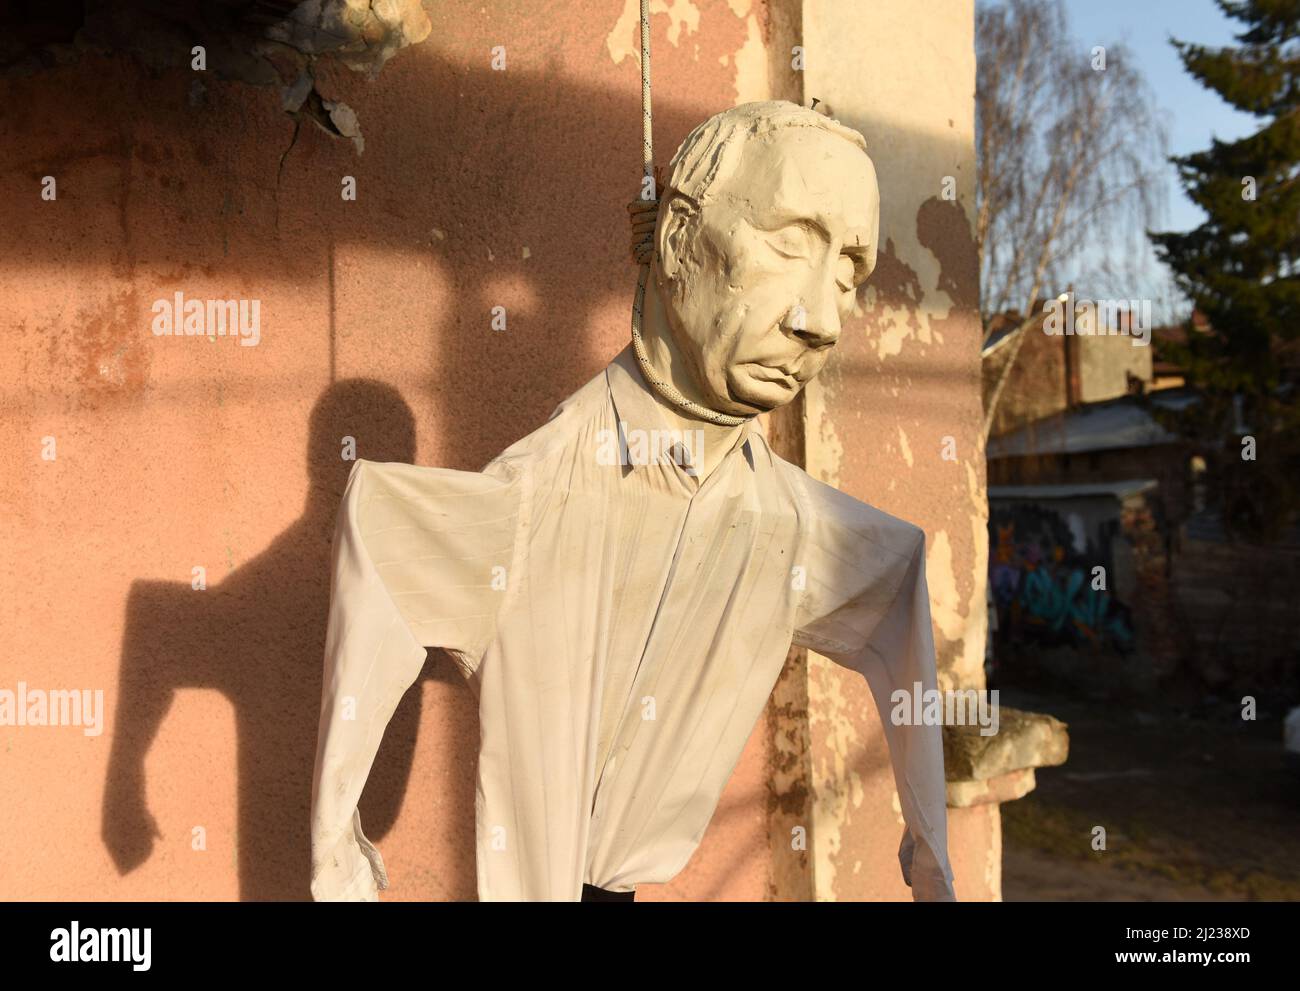 An effigy of Russian President Vladimir Putin on a hangman's rope hangs  from a building balcony Stock Photo - Alamy